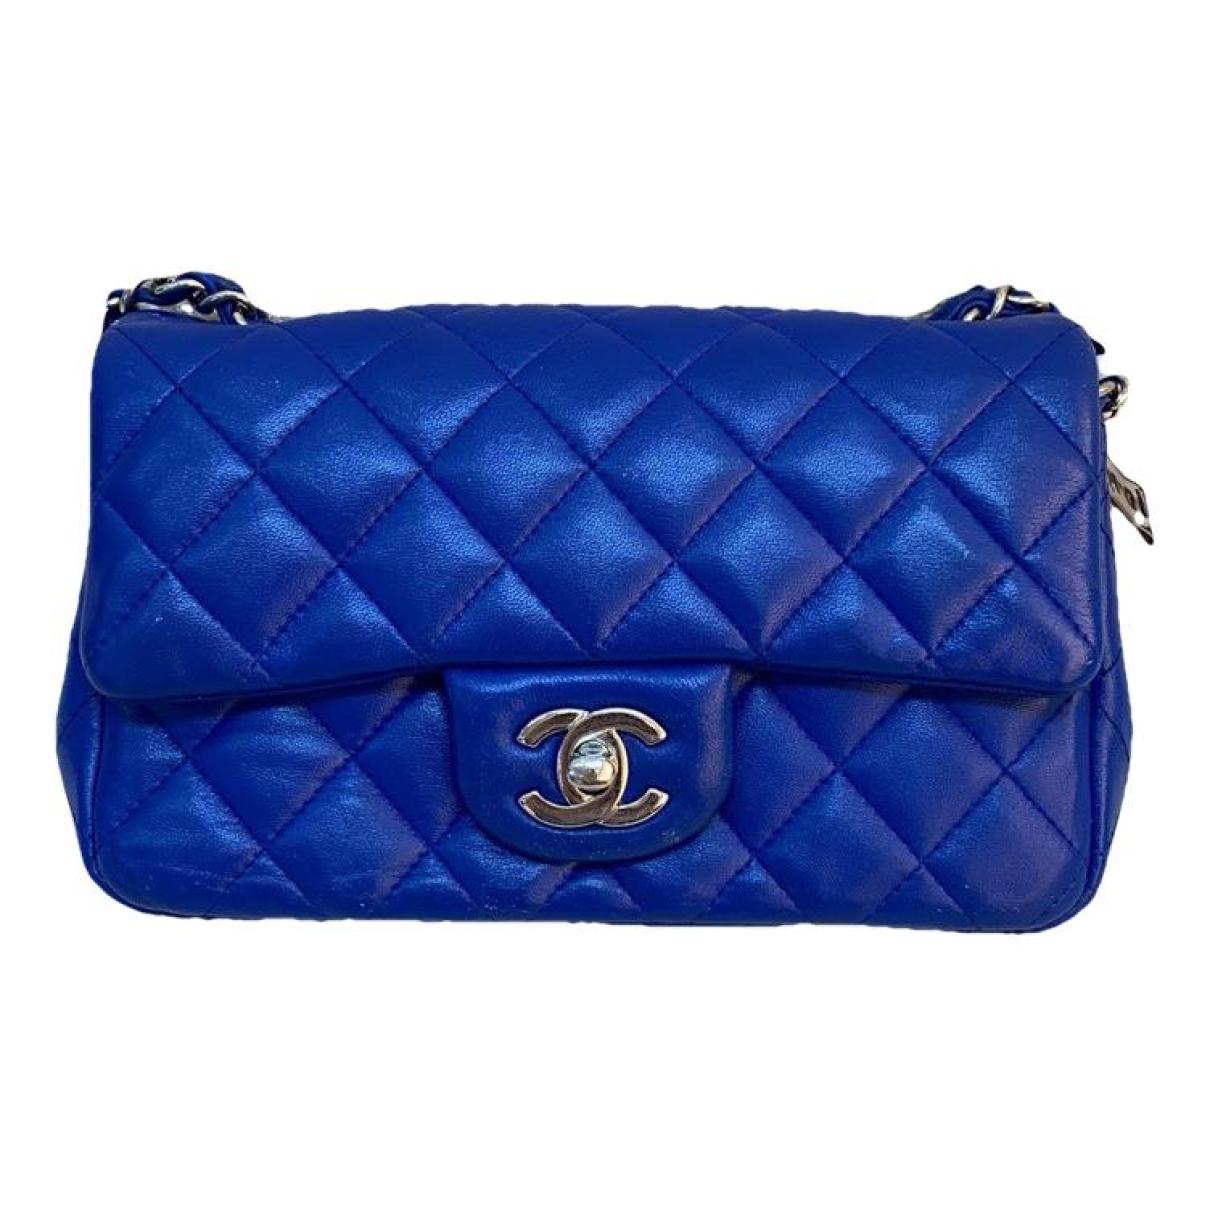 Coco curve leather handbag Chanel Blue in Leather - 36002879